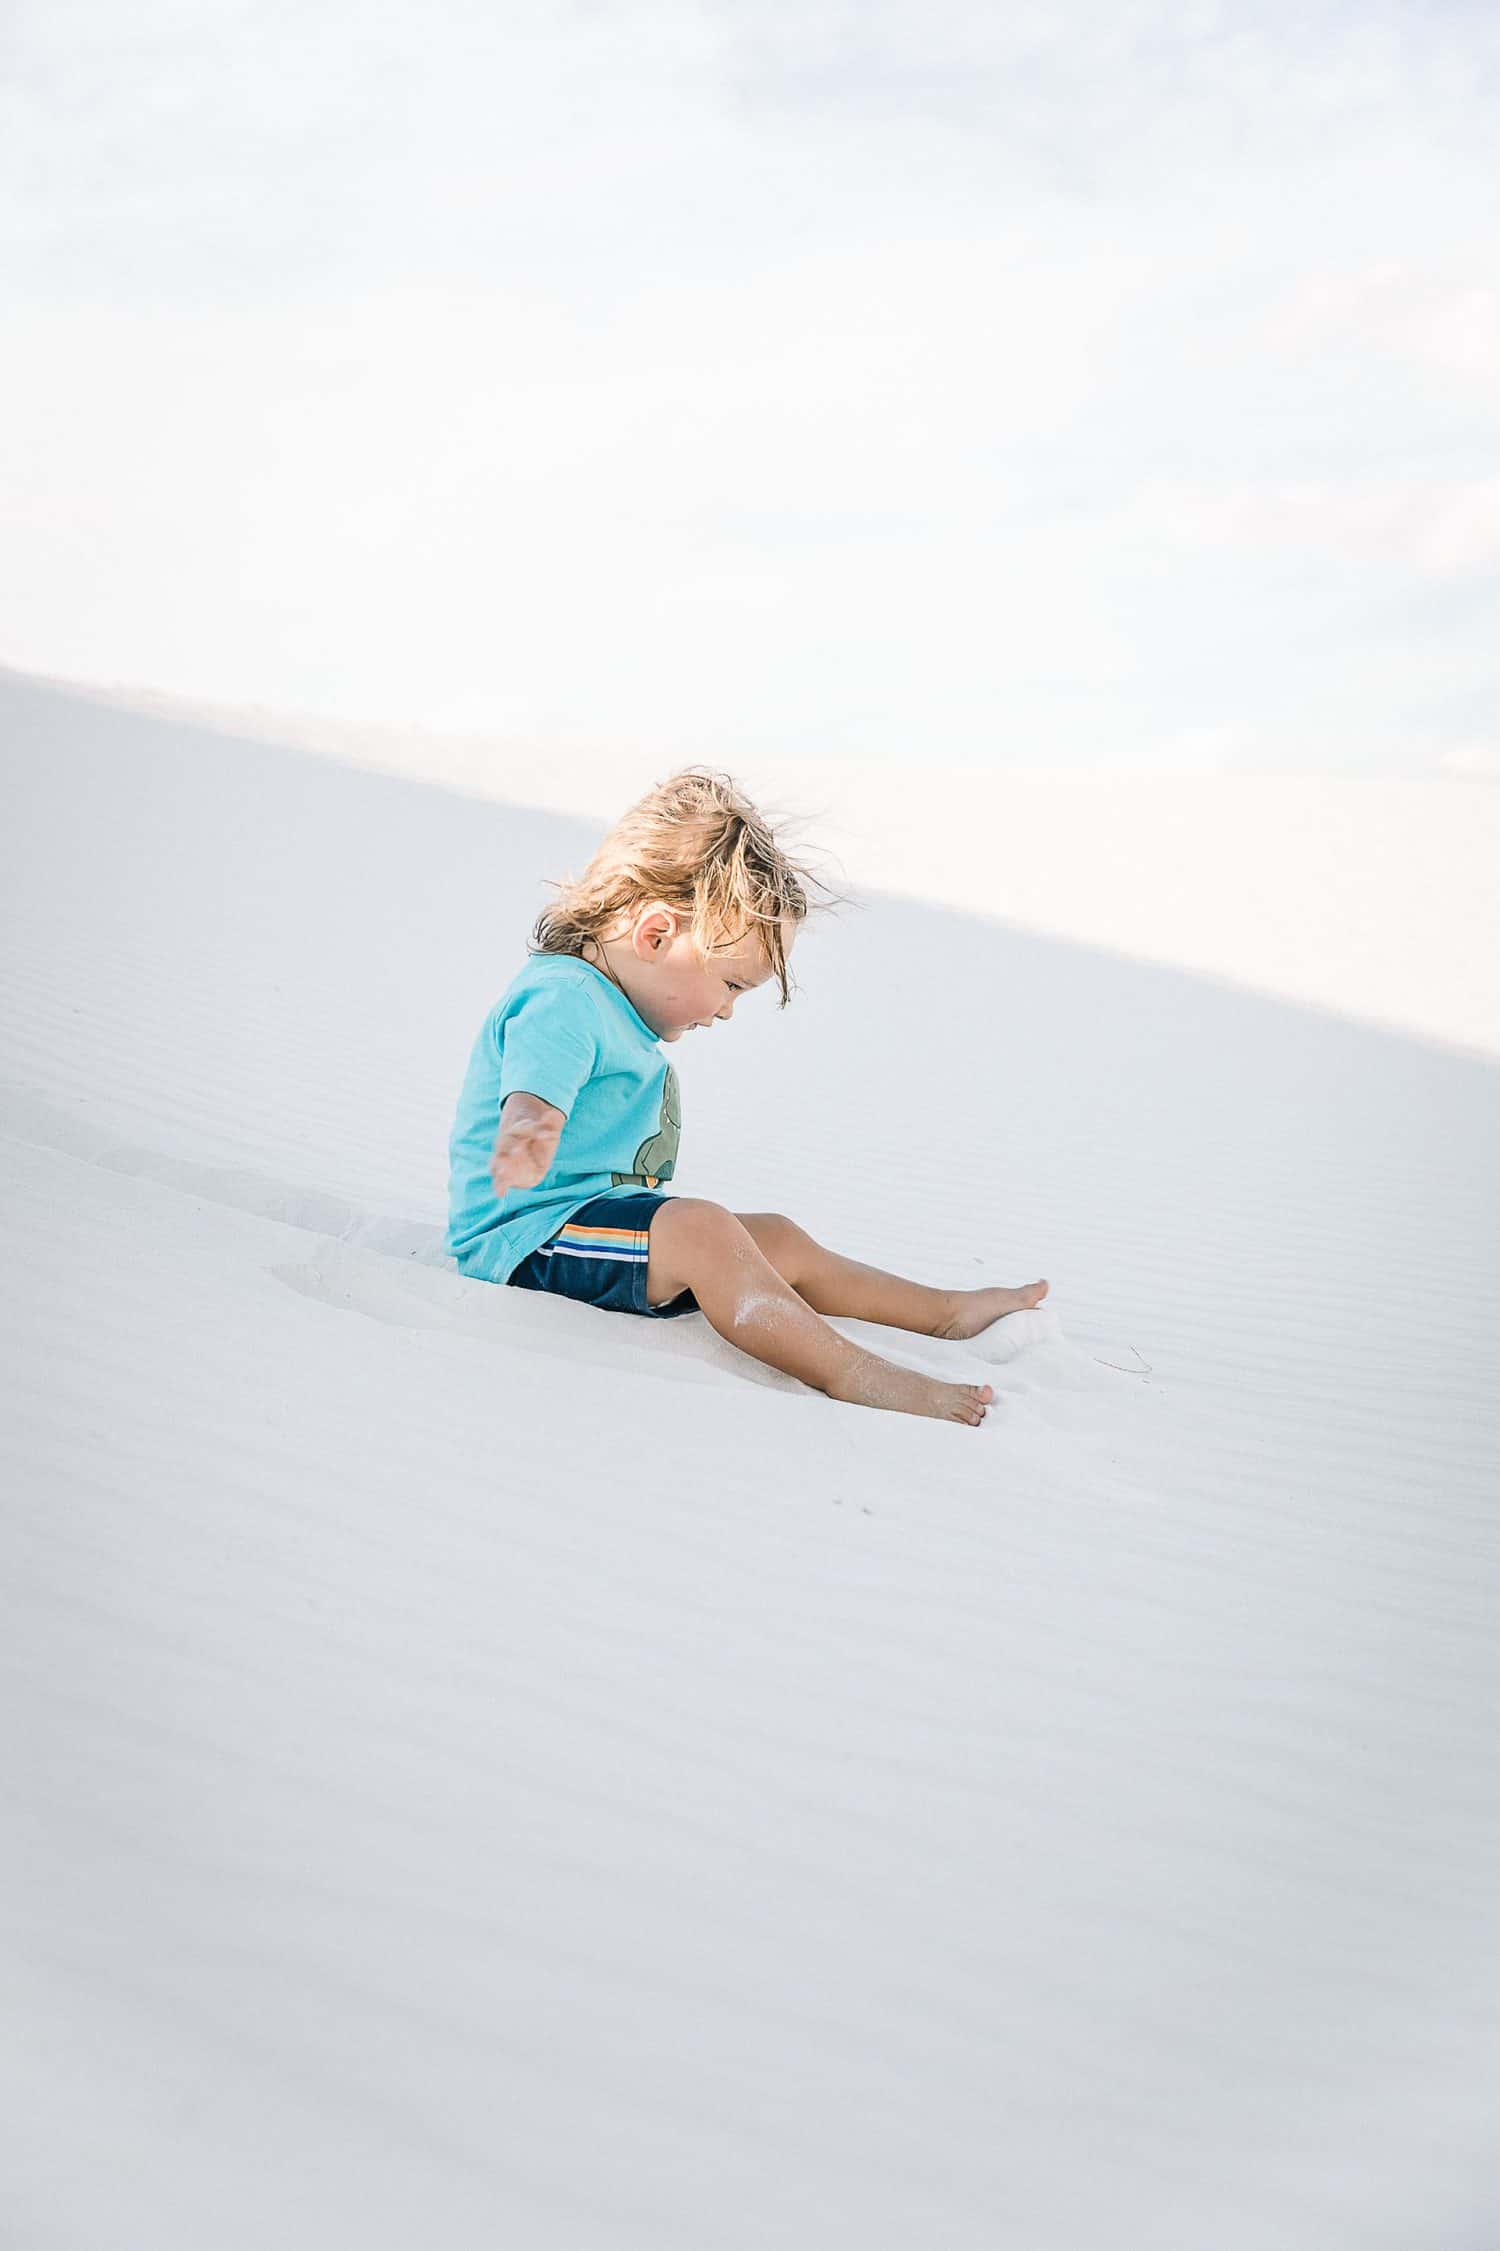 Visiting White Sands National Park with Kids